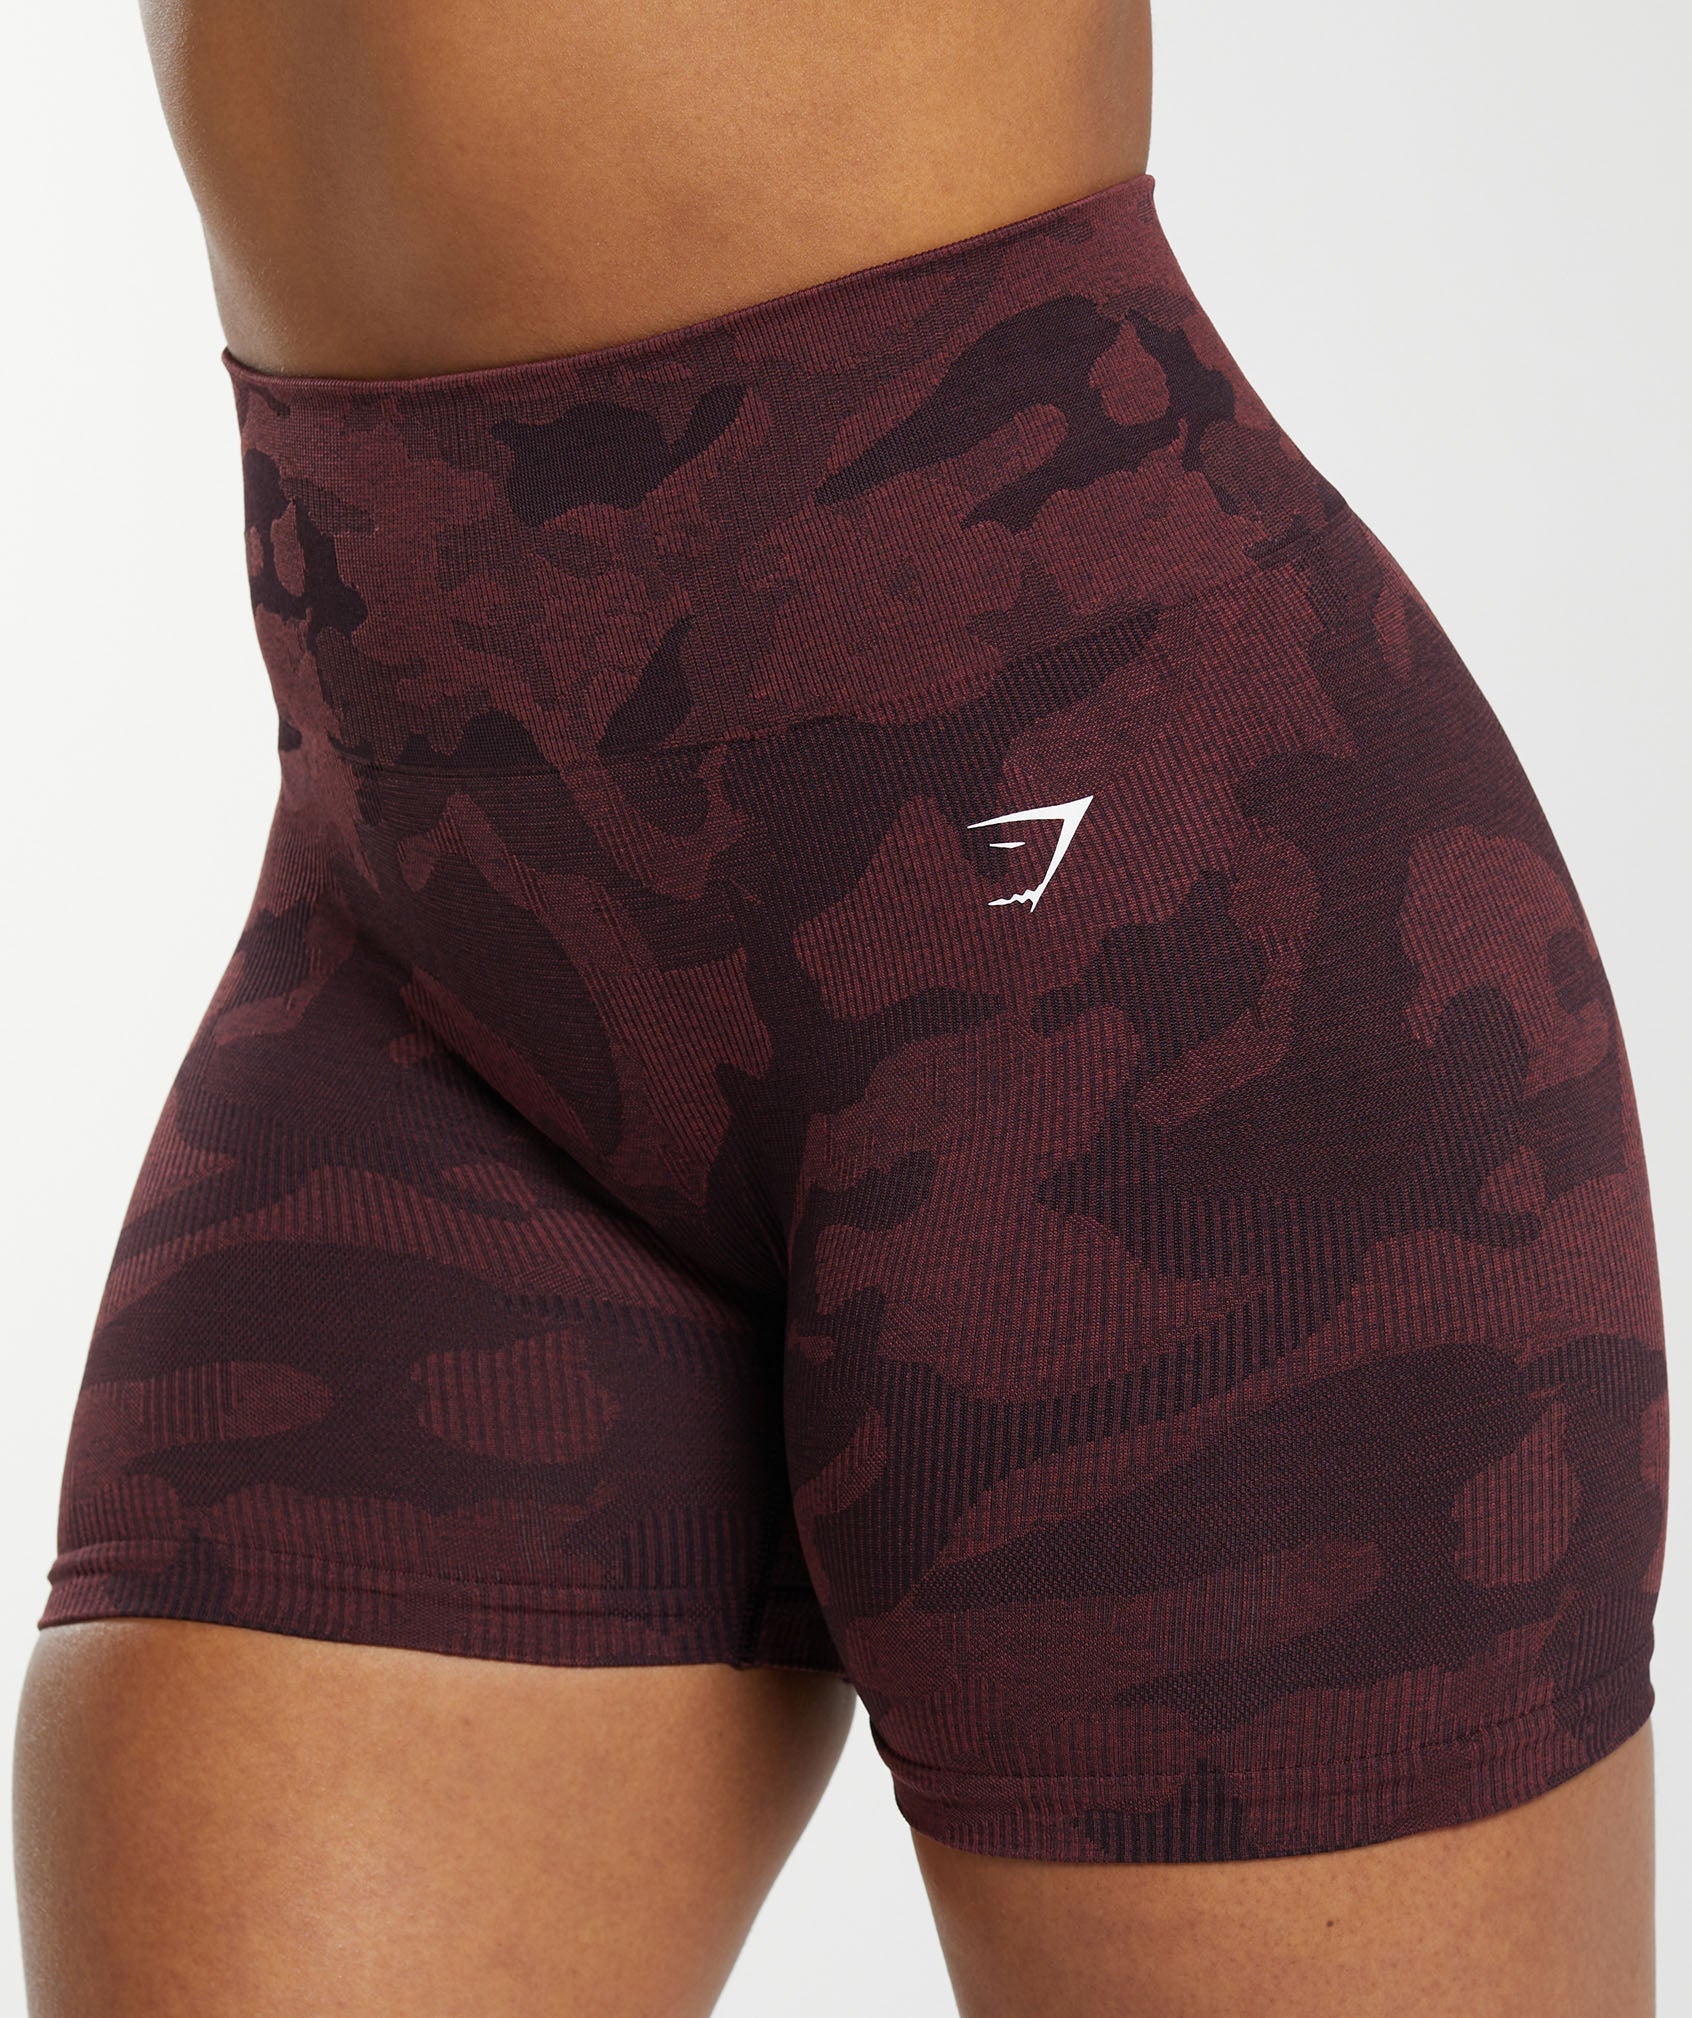 Adapt Camo Seamless Shorts in Plum Brown/Burgundy Brown - view 5